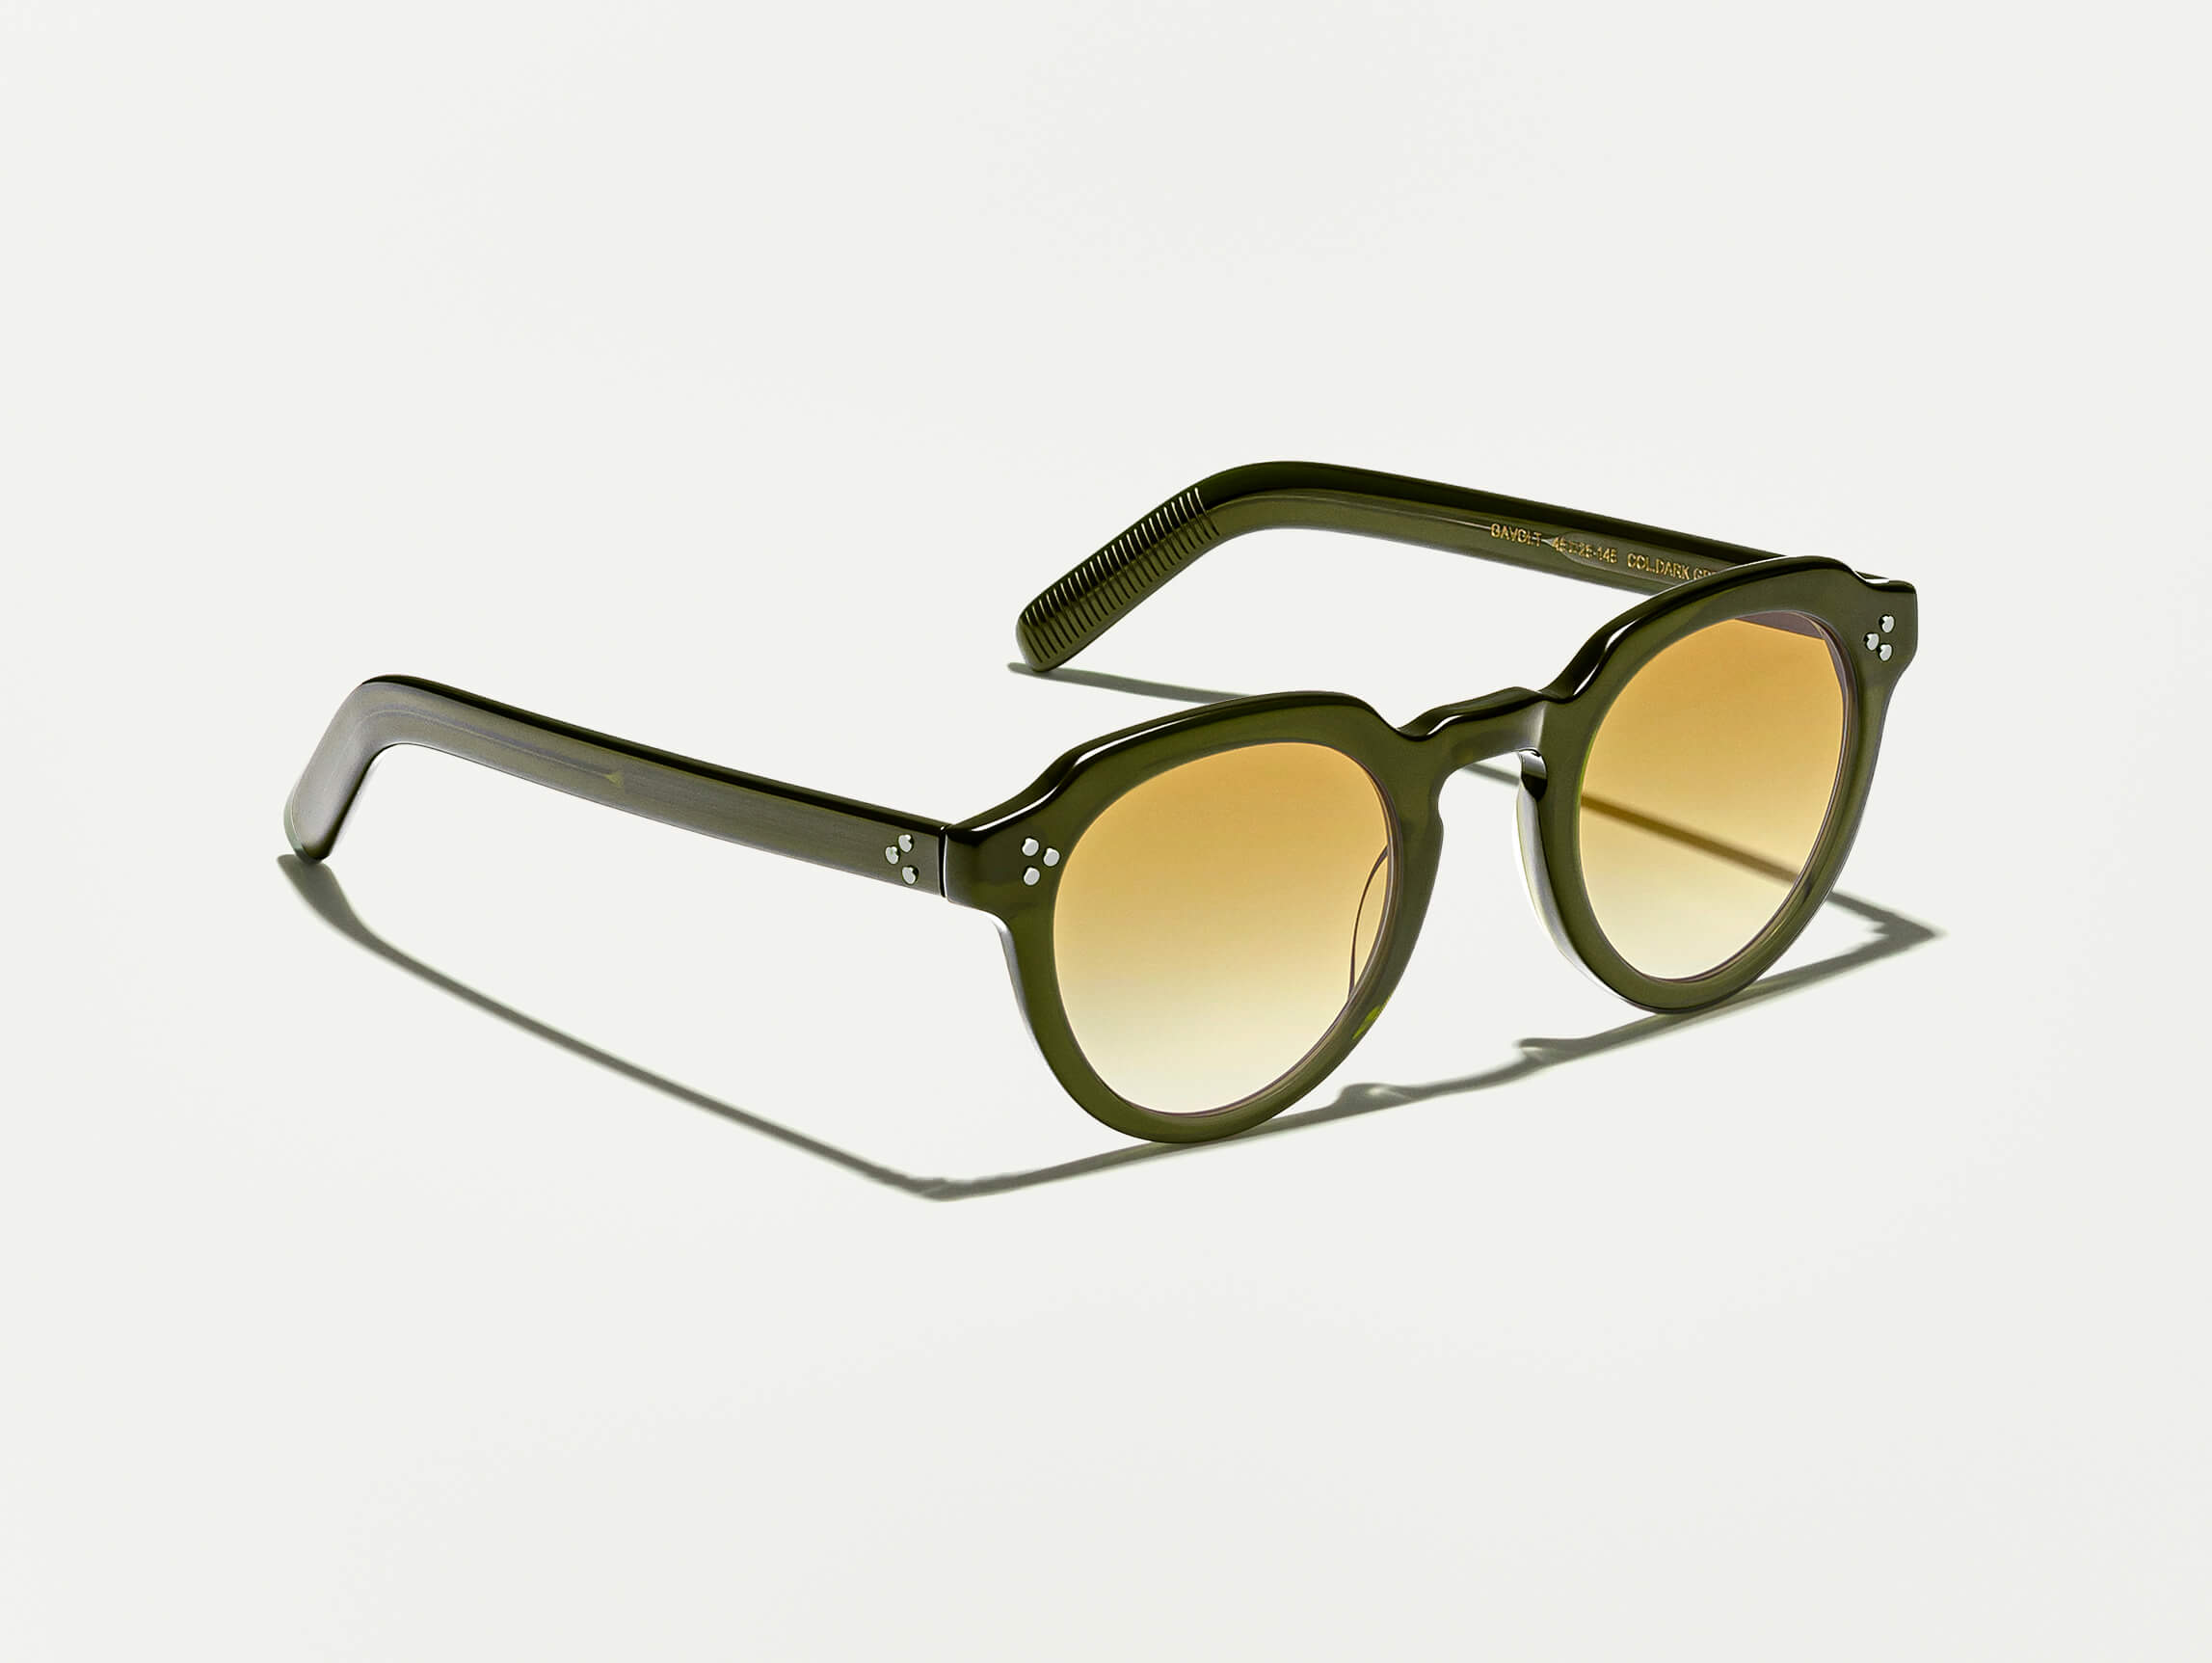 The GAVOLT SUN in Dark Green with Chestnut Fade Tinted Lenses